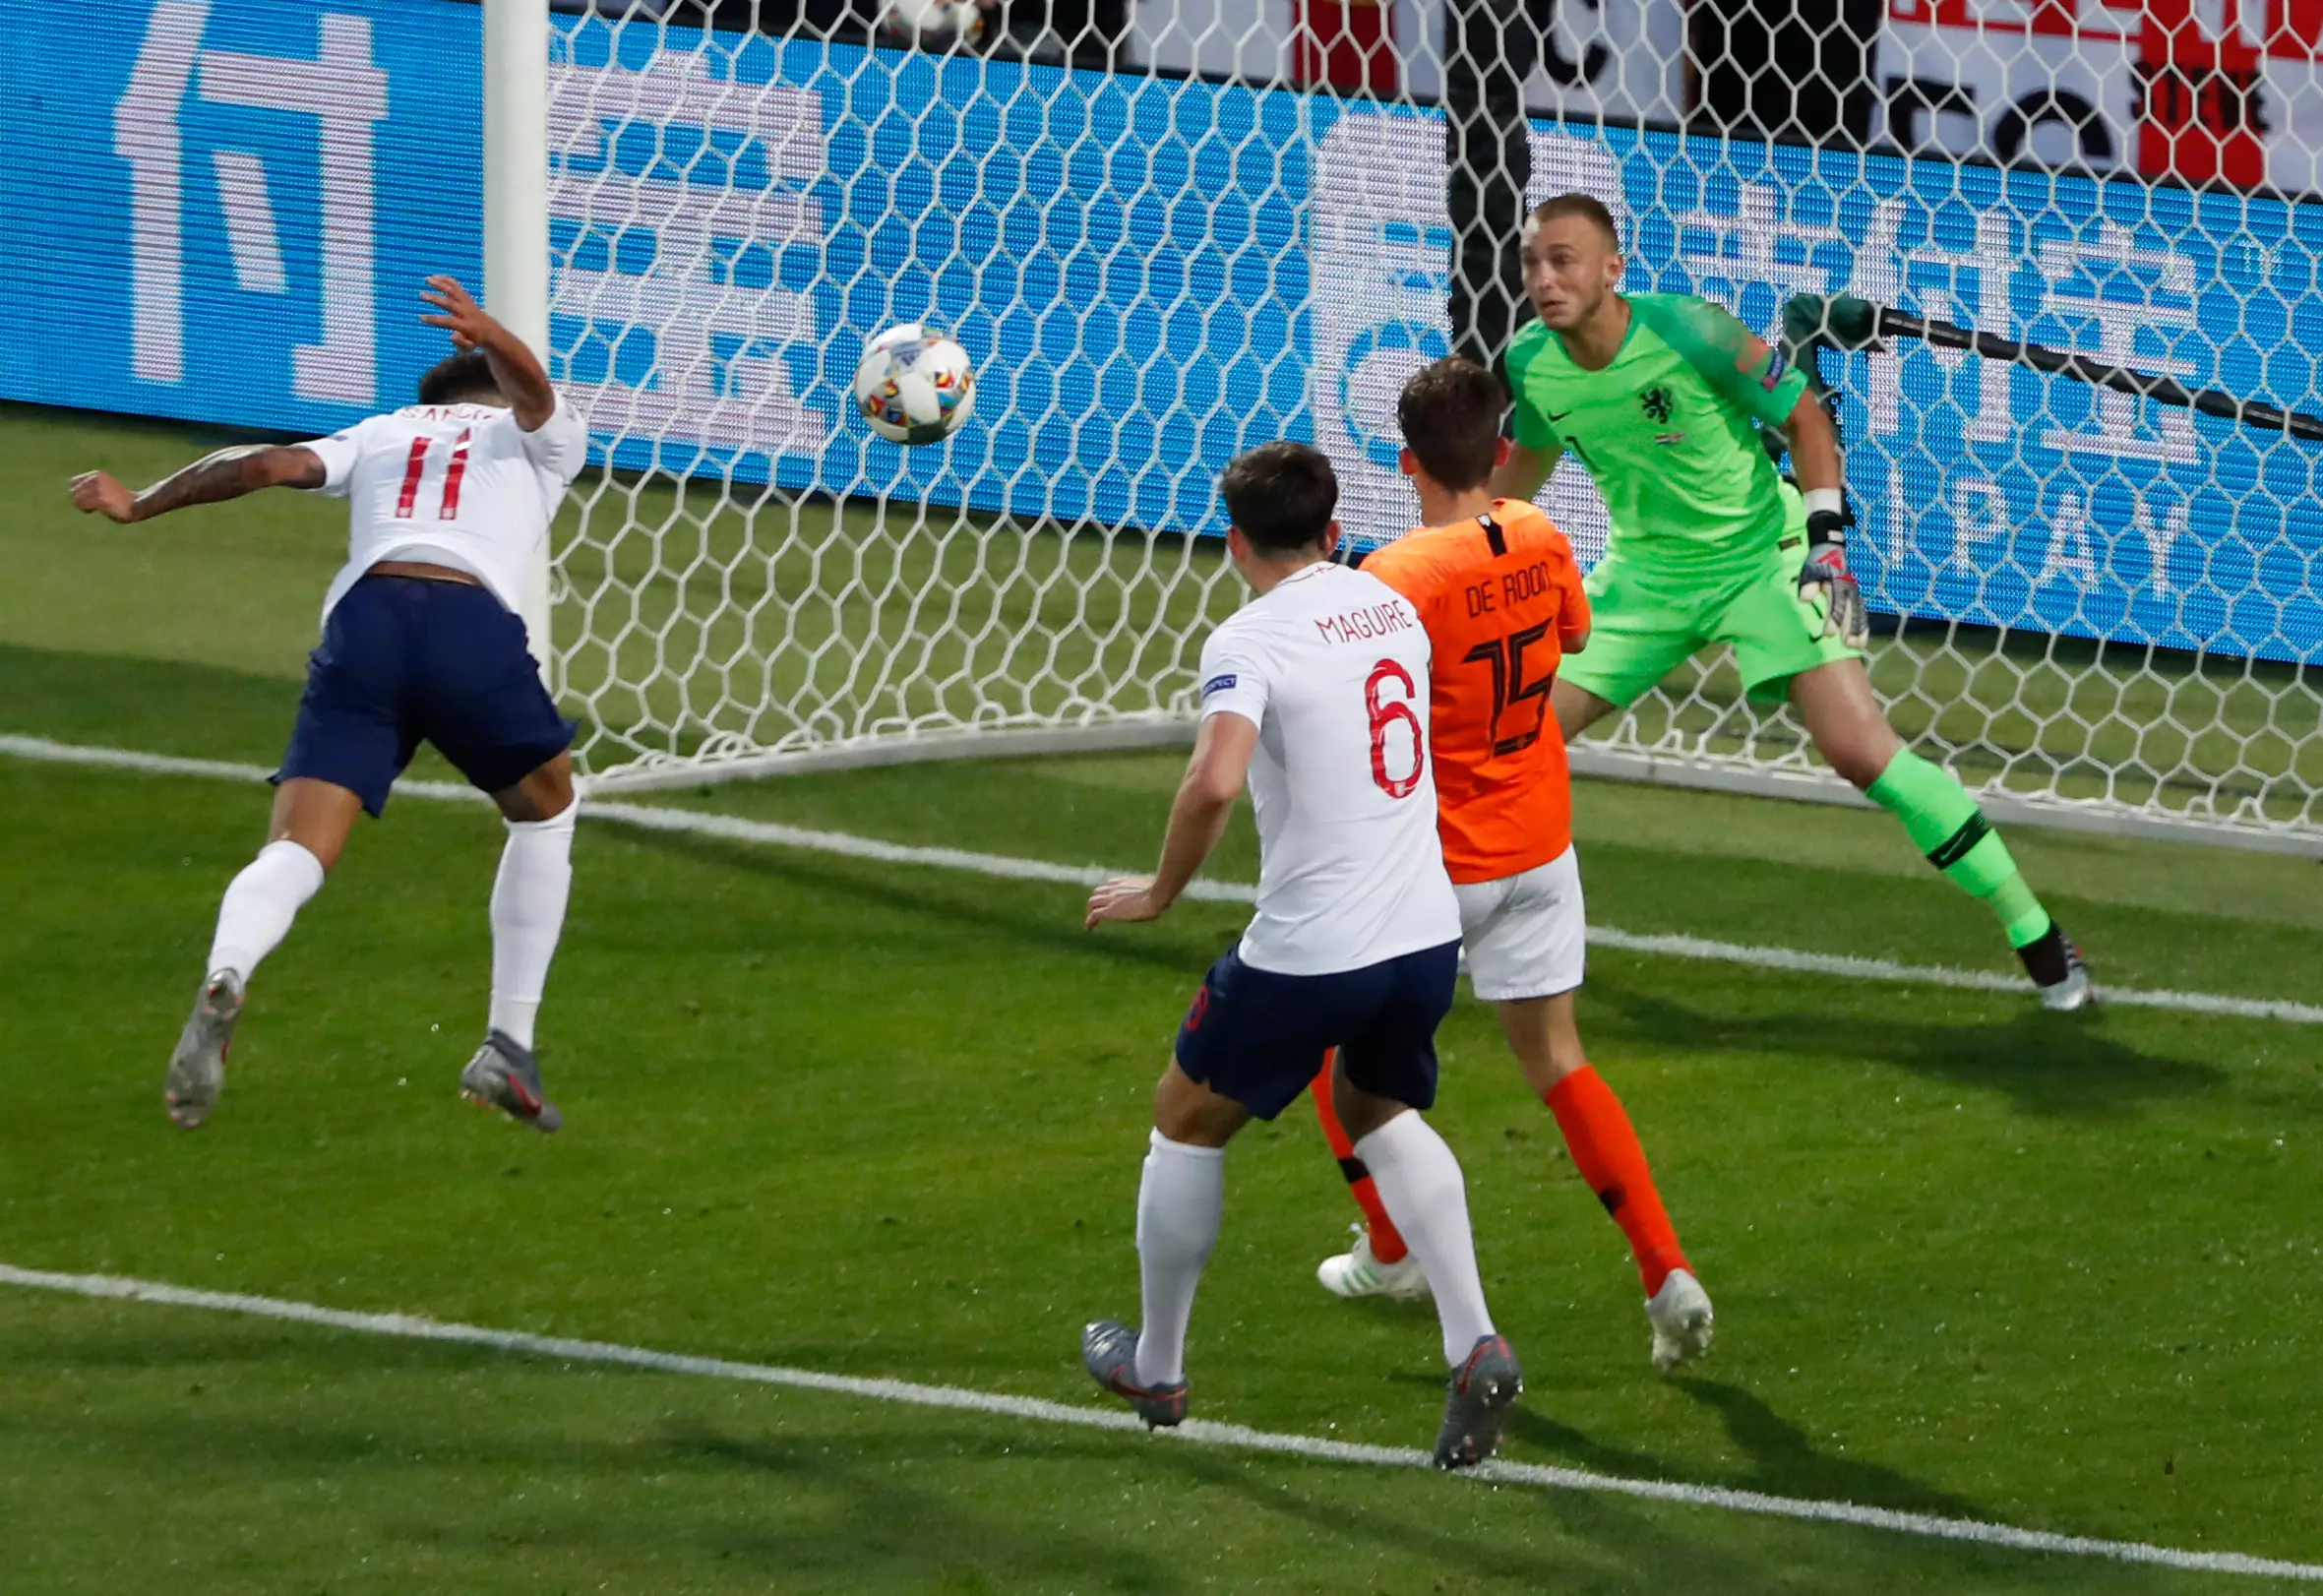 England vs Netherlands: Live Stream, TV Channel And Kick-Off Time For UEFA Nations League Showdown